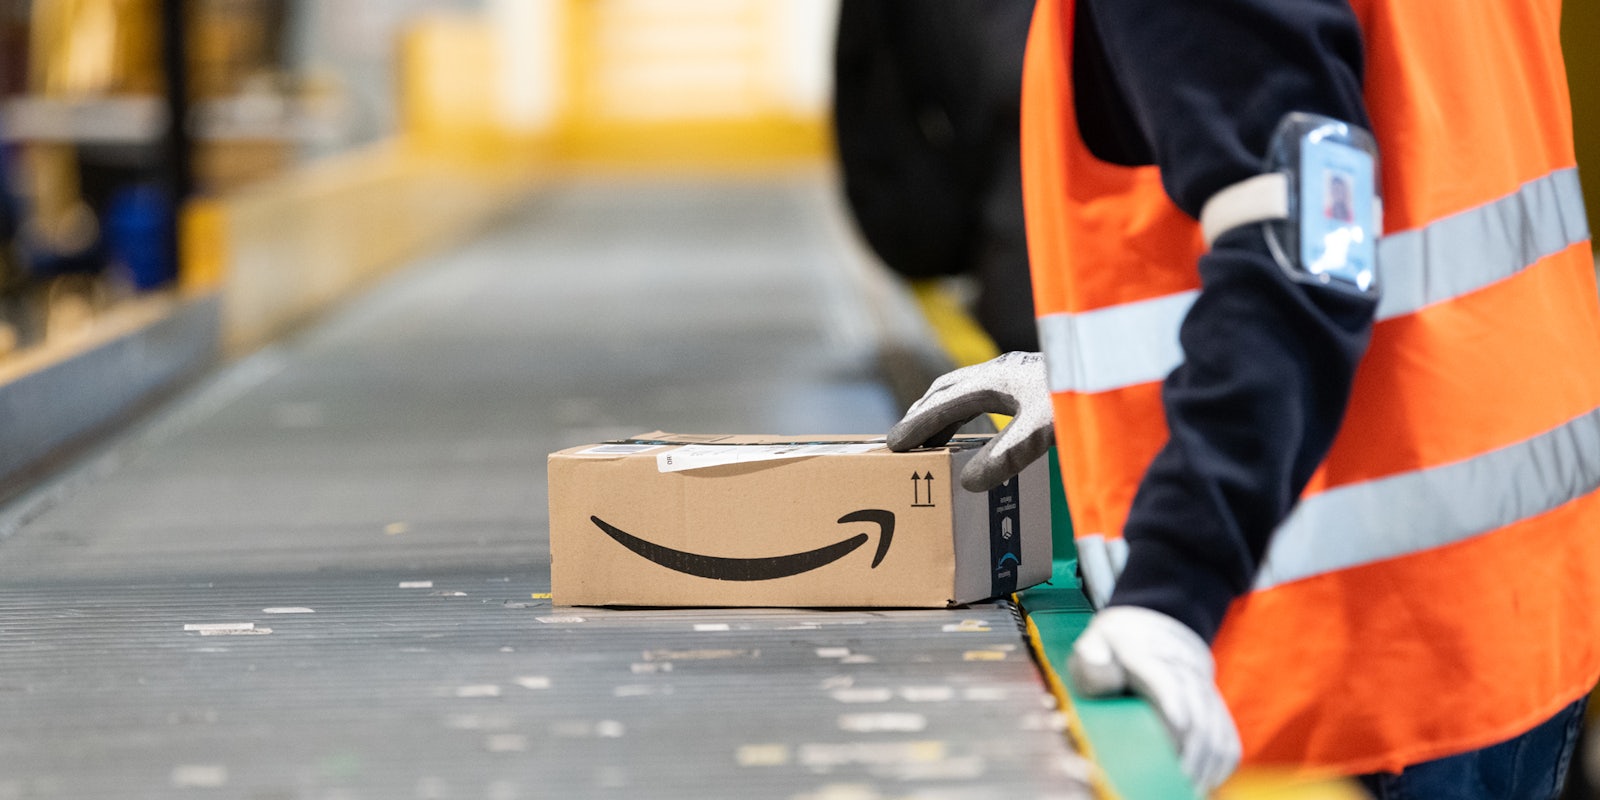 An Amazon warehouse worker pushing a package down a conveyer belt.